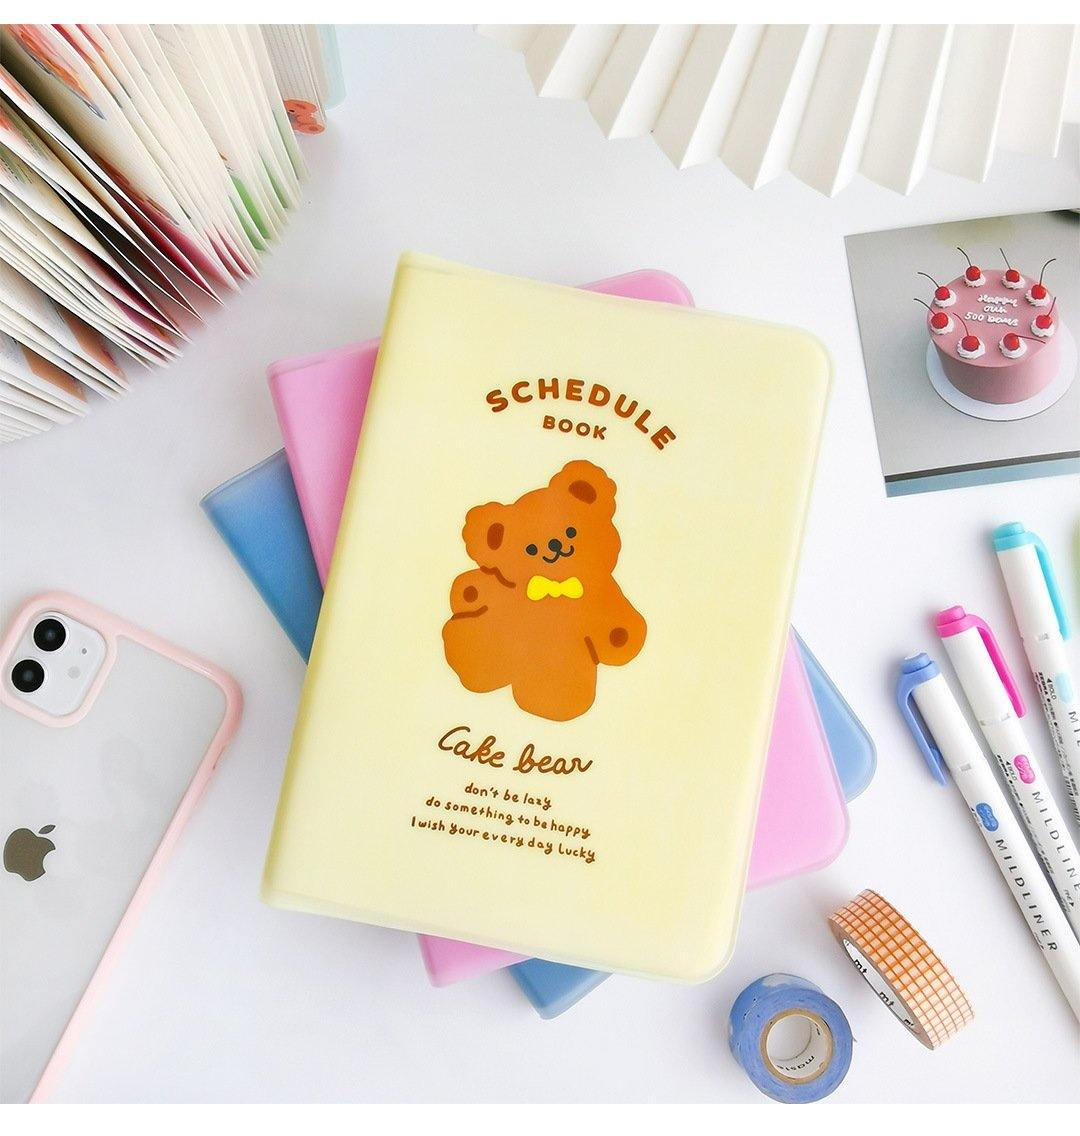 Calendars, Organizers & Planners - Schedule Book - Care Bear - Yellow